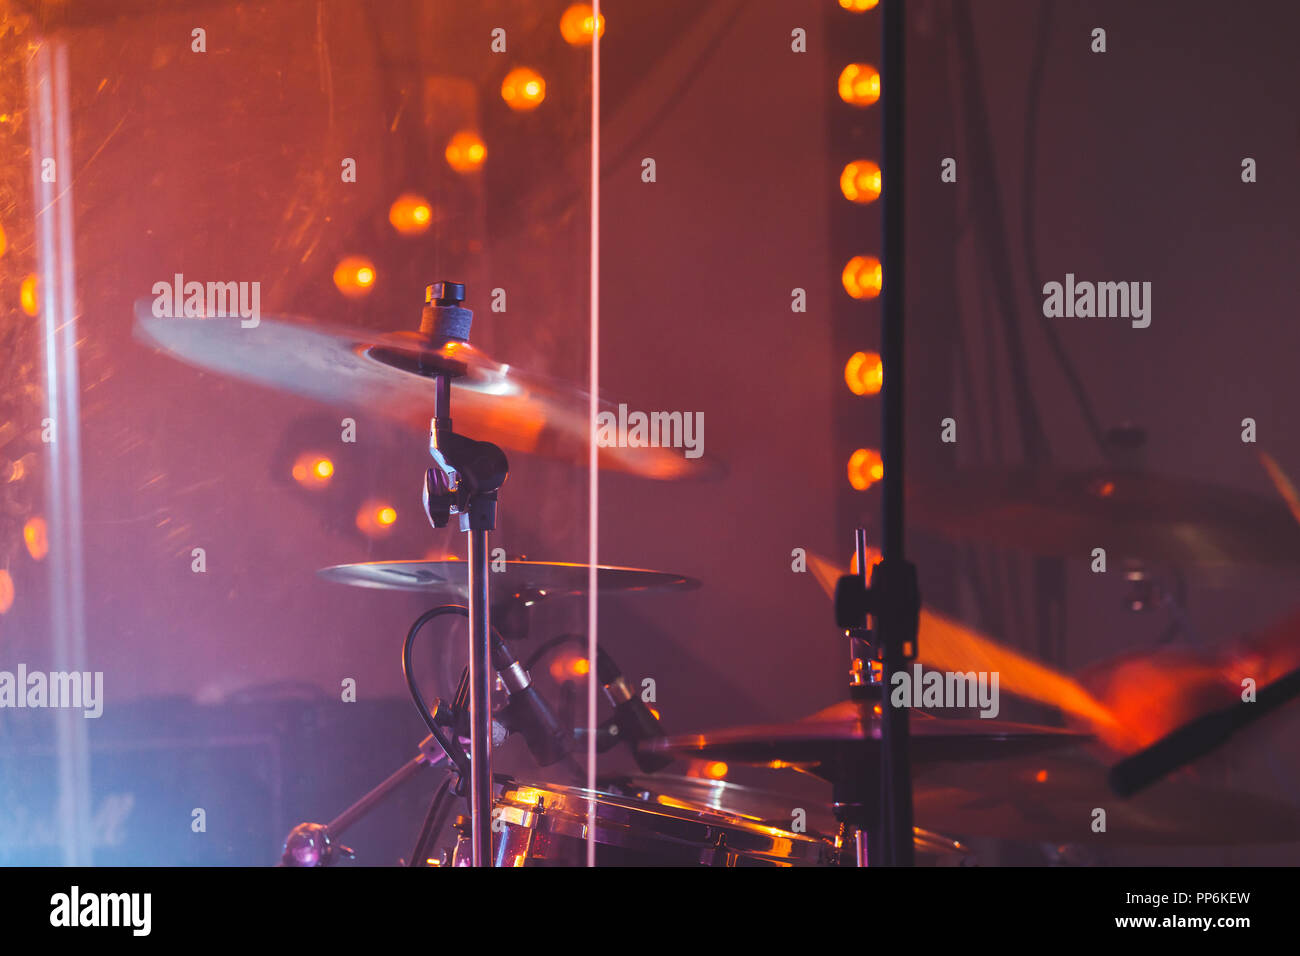 Live rock music colorful background, drummer plays with drumsticks on rock drum set. Warm toned closeup photo, soft selective focus Stock Photo